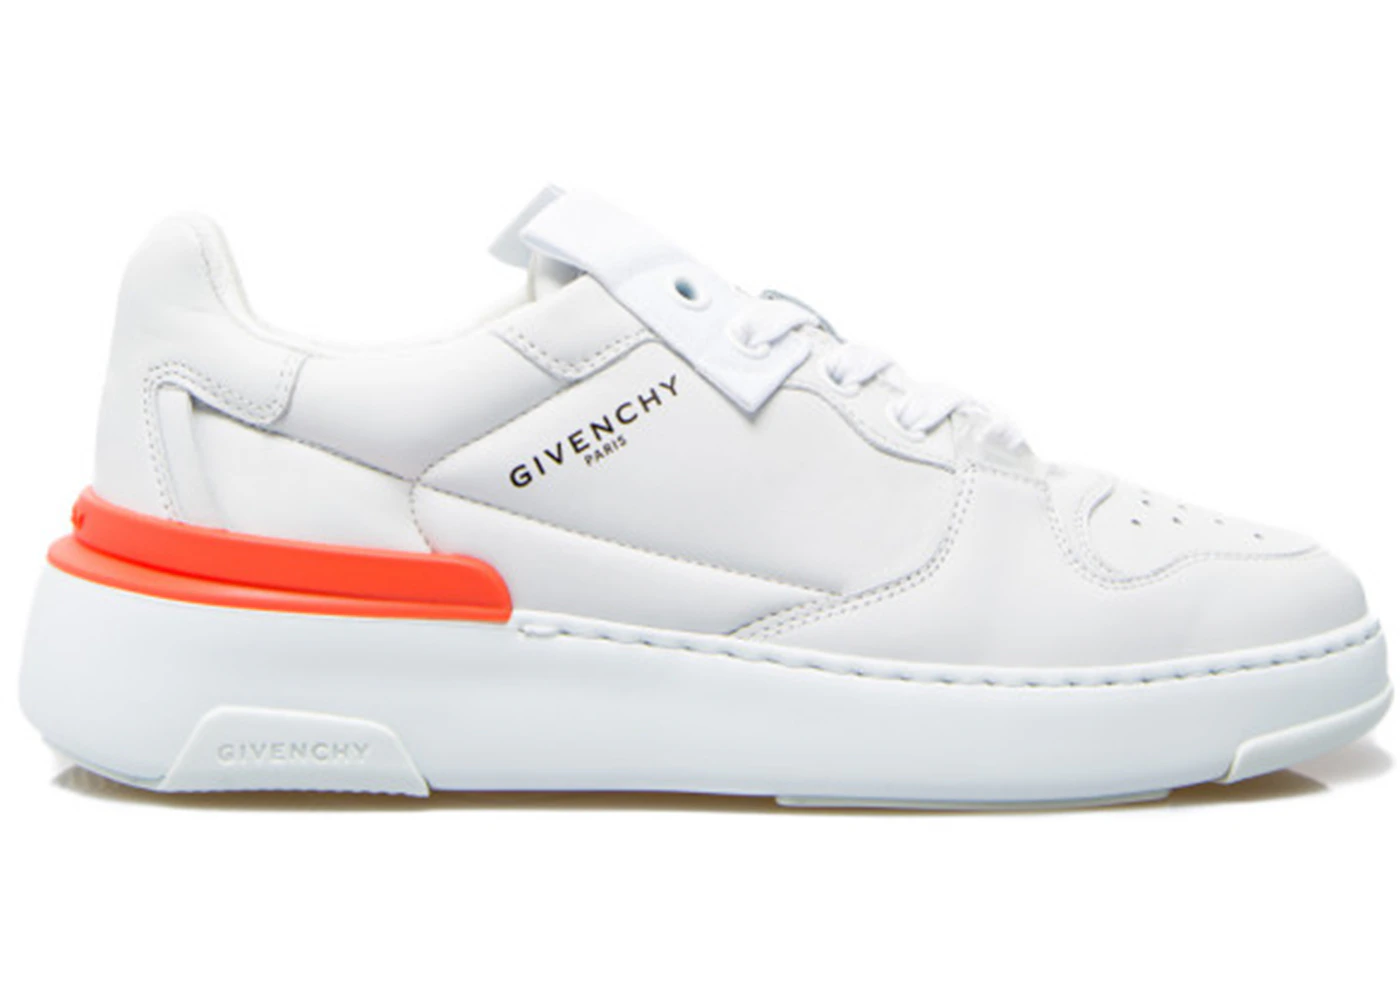 Givenchy Wing Low Natural Orange (Women's) - BE0010E0SK-101 - US